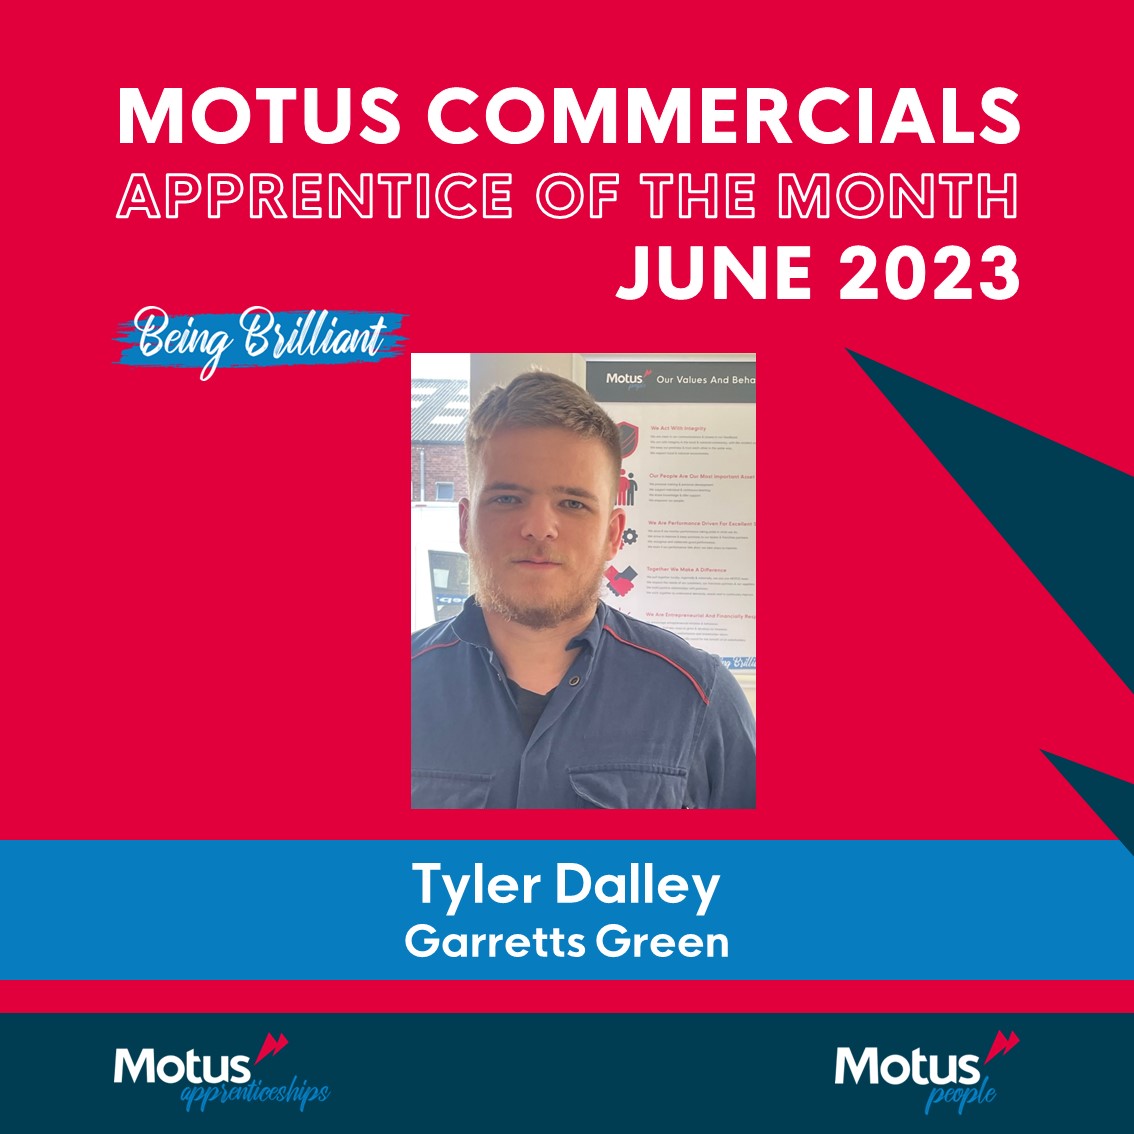 Congratulations to Tyler Dalley, June's Apprentice of the Month! ⭐

Tyler was nominated by his service manager, Tanya Ford, and she couldn't be prouder of his progress!🥳

#ApprenticeOfTheMonth #Nomination #Award #Talent #Proud #TeamMotus #Apprentice #MotusCommercialsCareers